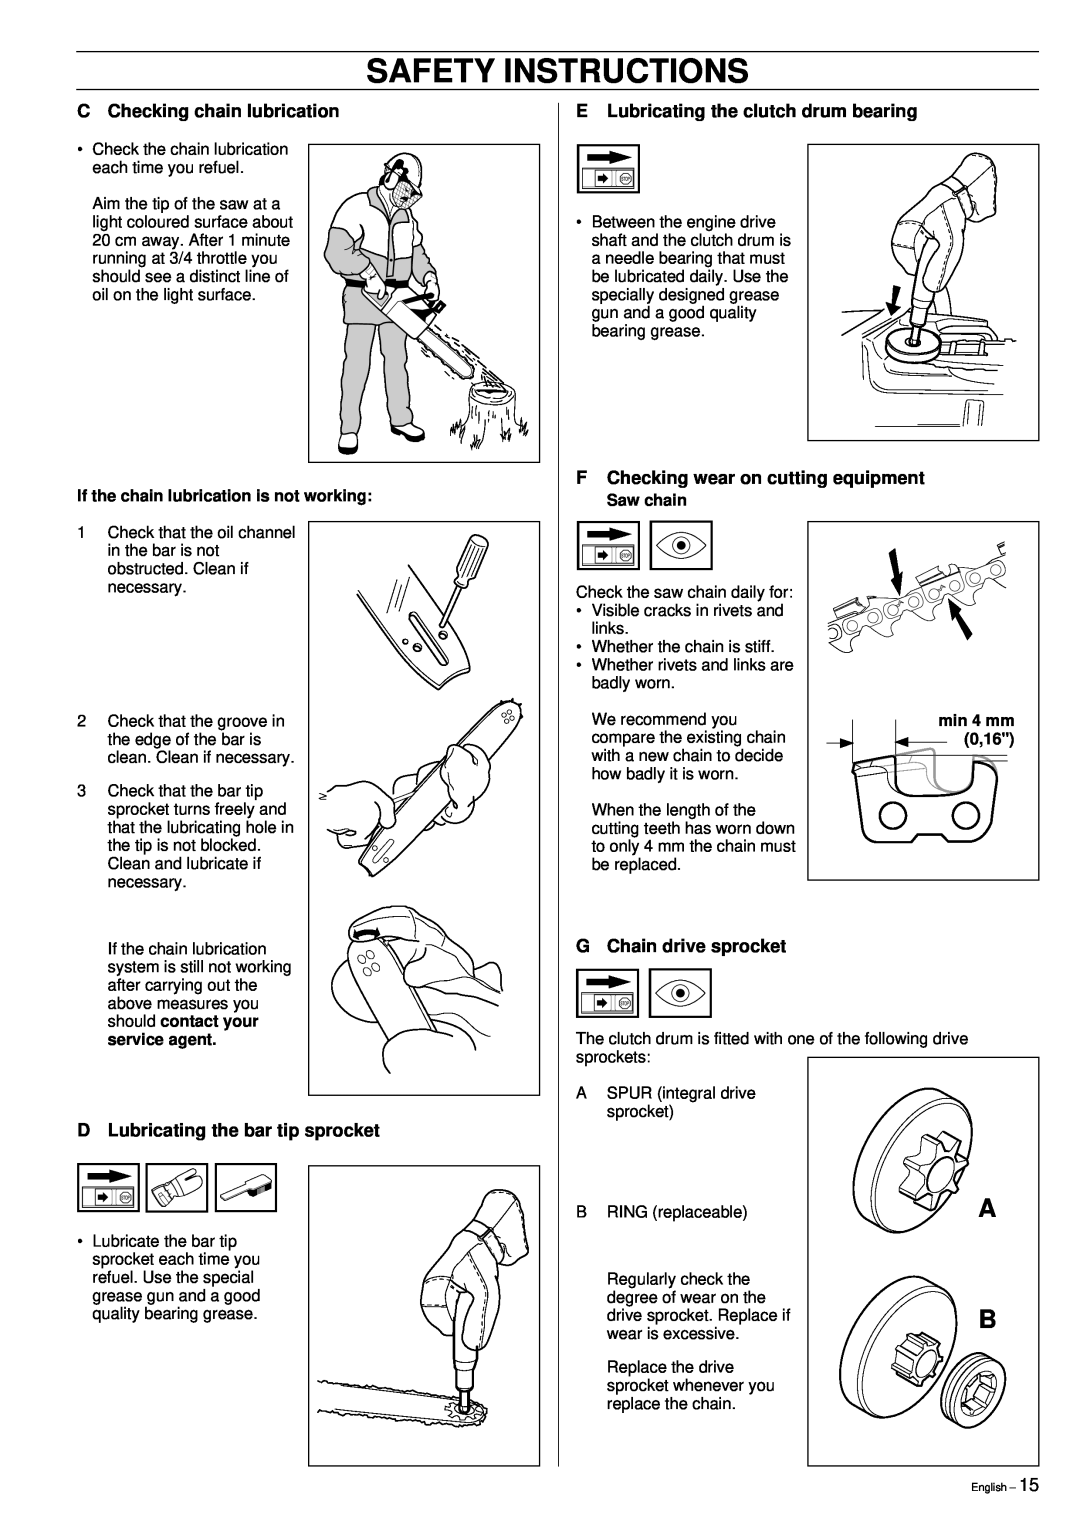 Husqvarna 61, 268, 272XP manual Safety Instructions, C Checking chain lubrication, E Lubricating the clutch drum bearing 